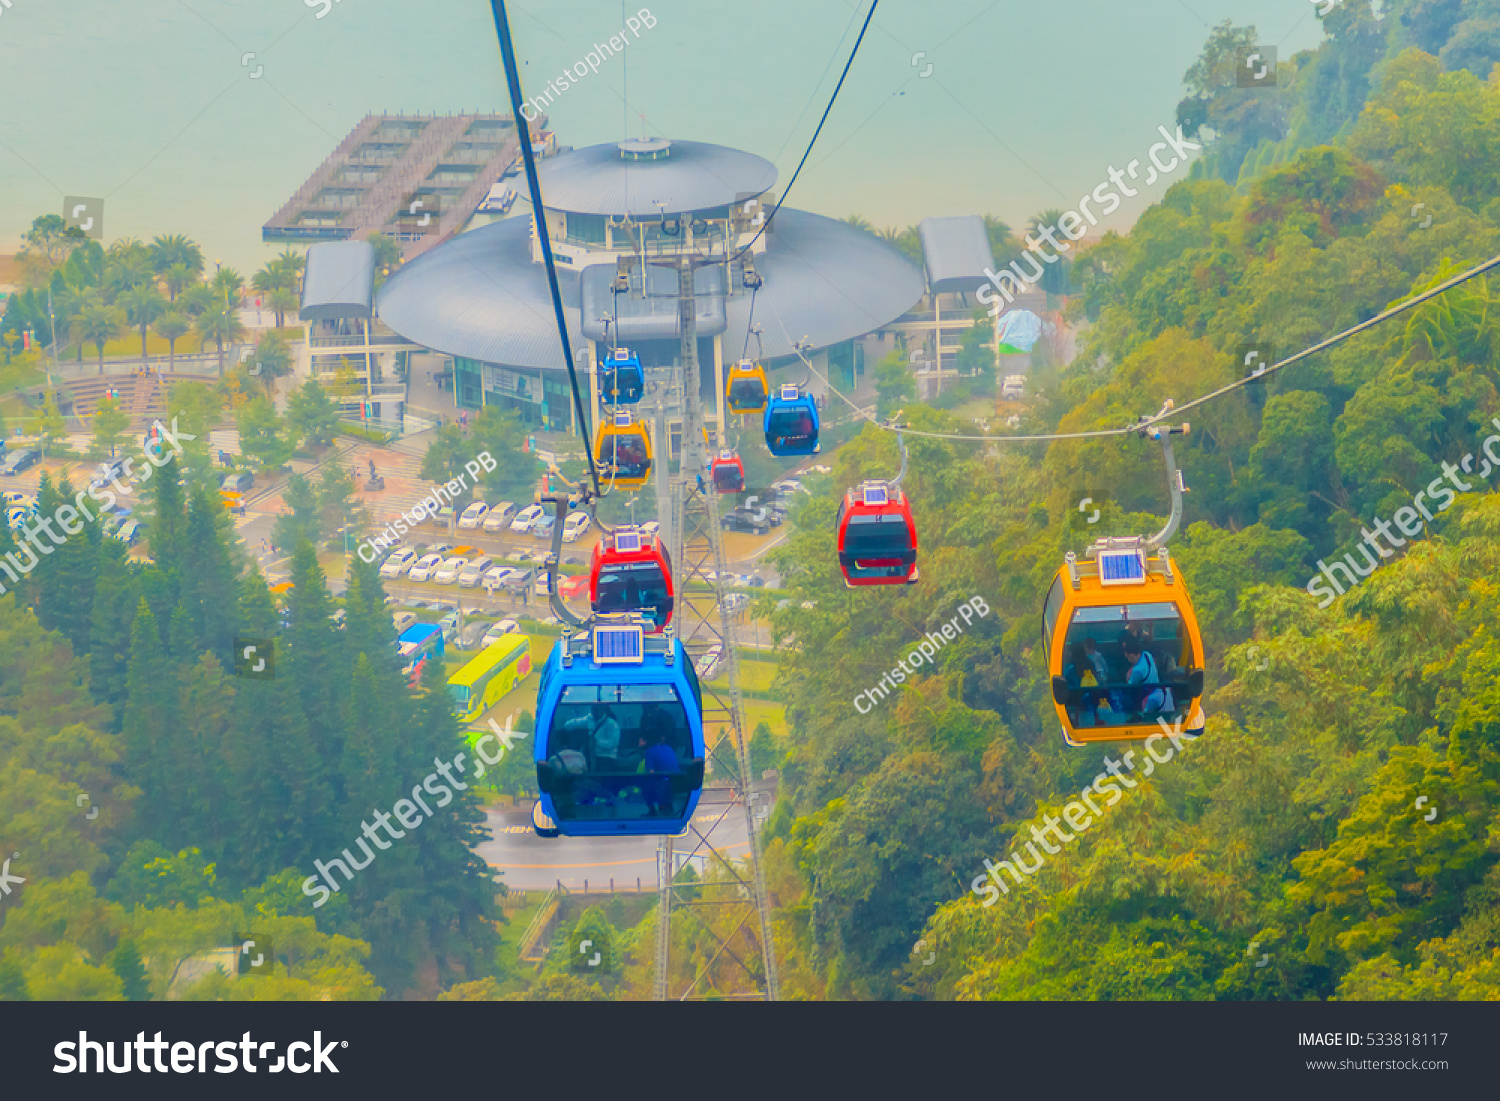 The Sun Moon Lake Ropeway is a scenic gondola cable car service that connects Sun Moon Lake with the Formosa Aboriginal Culture Village theme park. #533818117